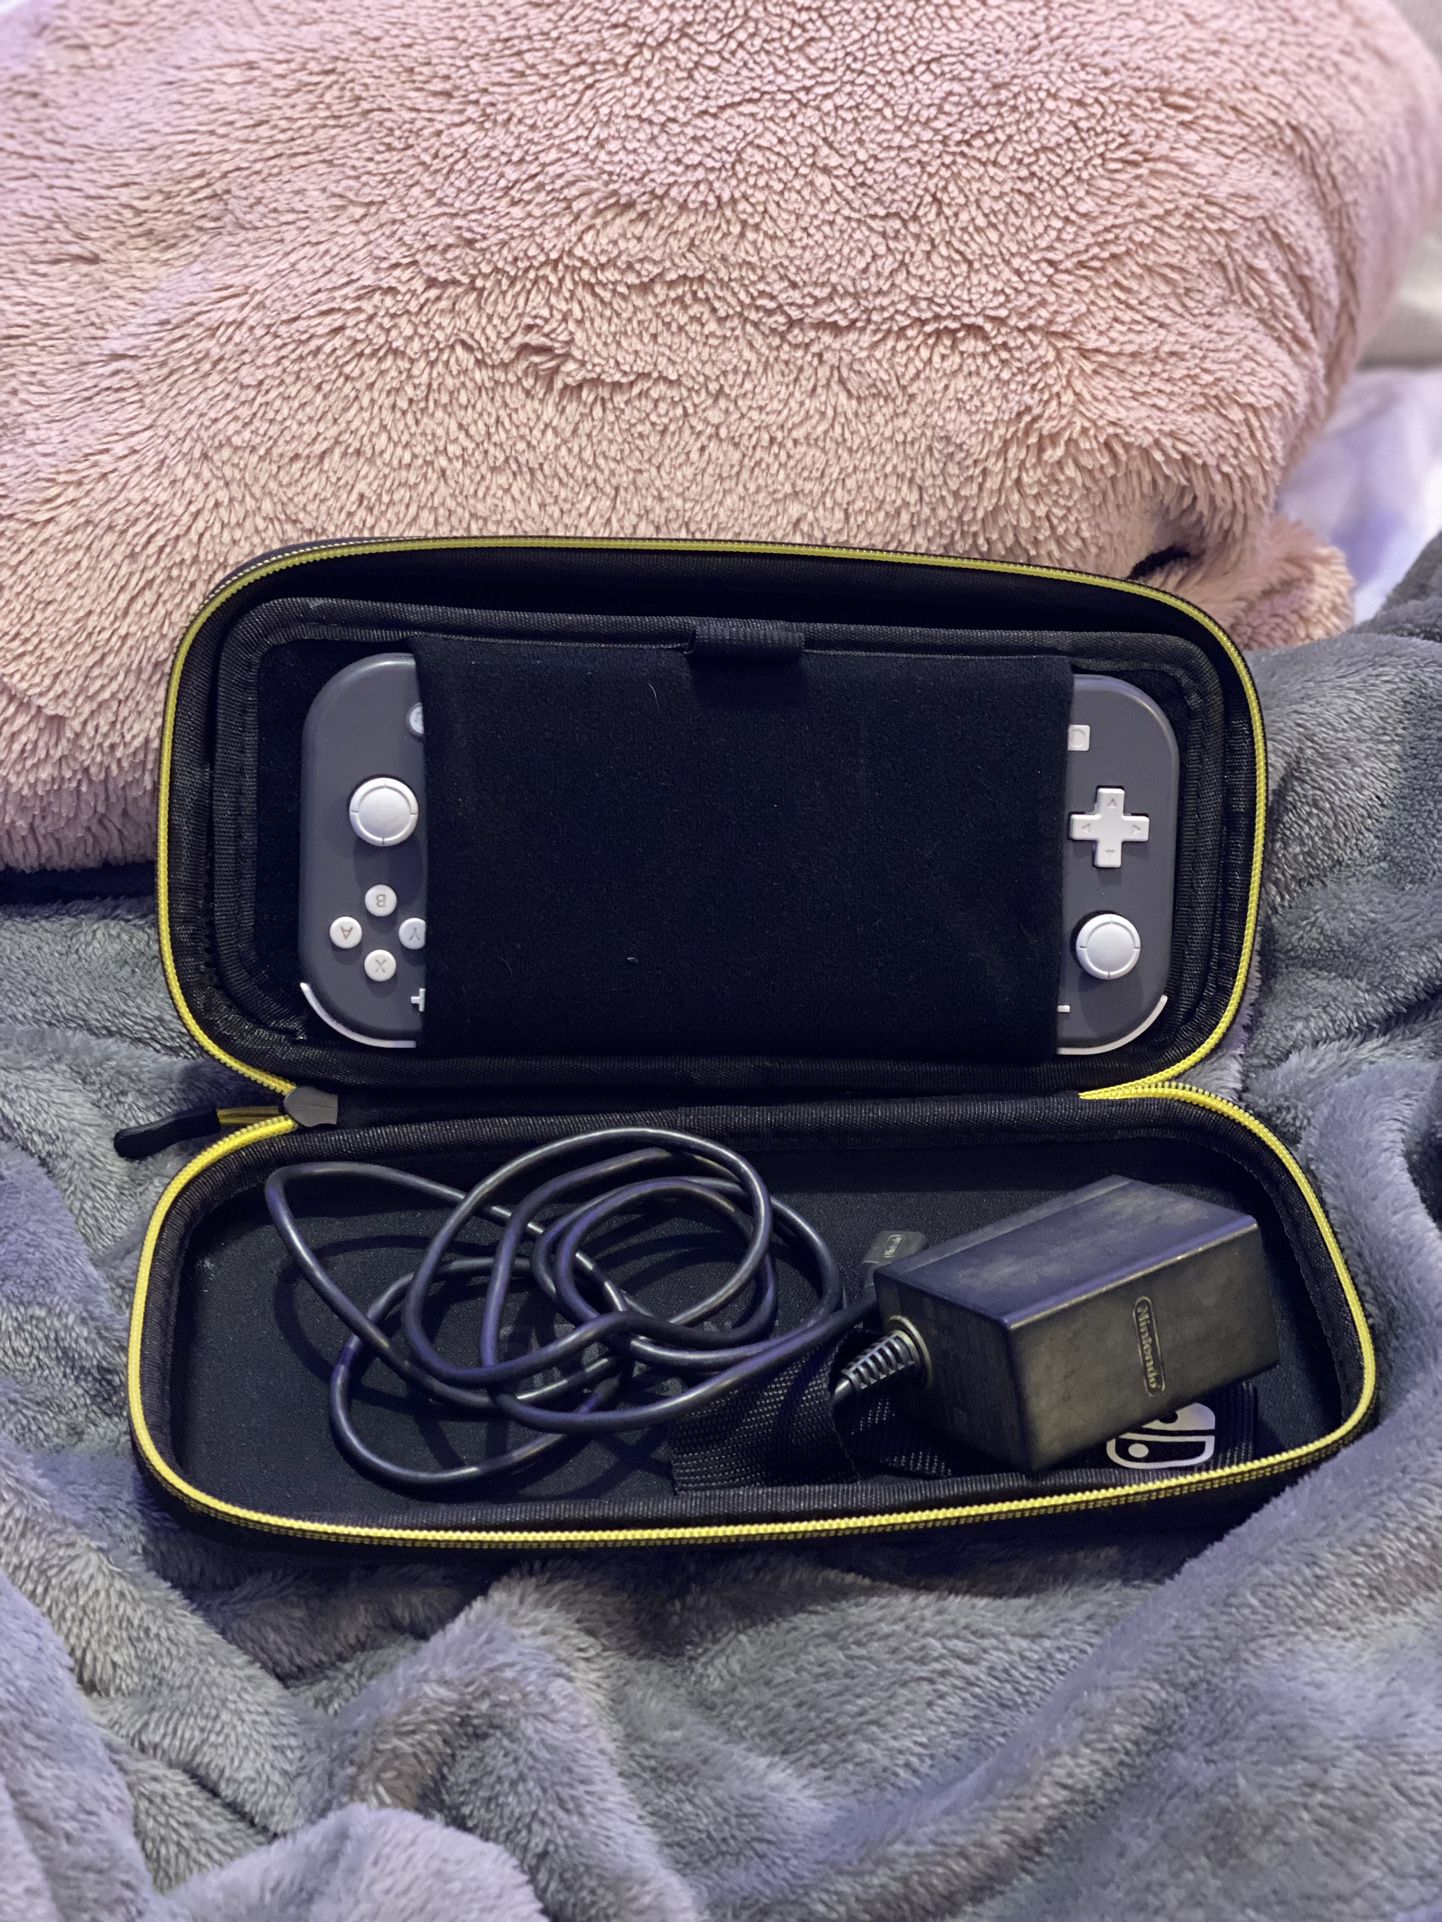 Nintendo Switch For Sale W/Games 